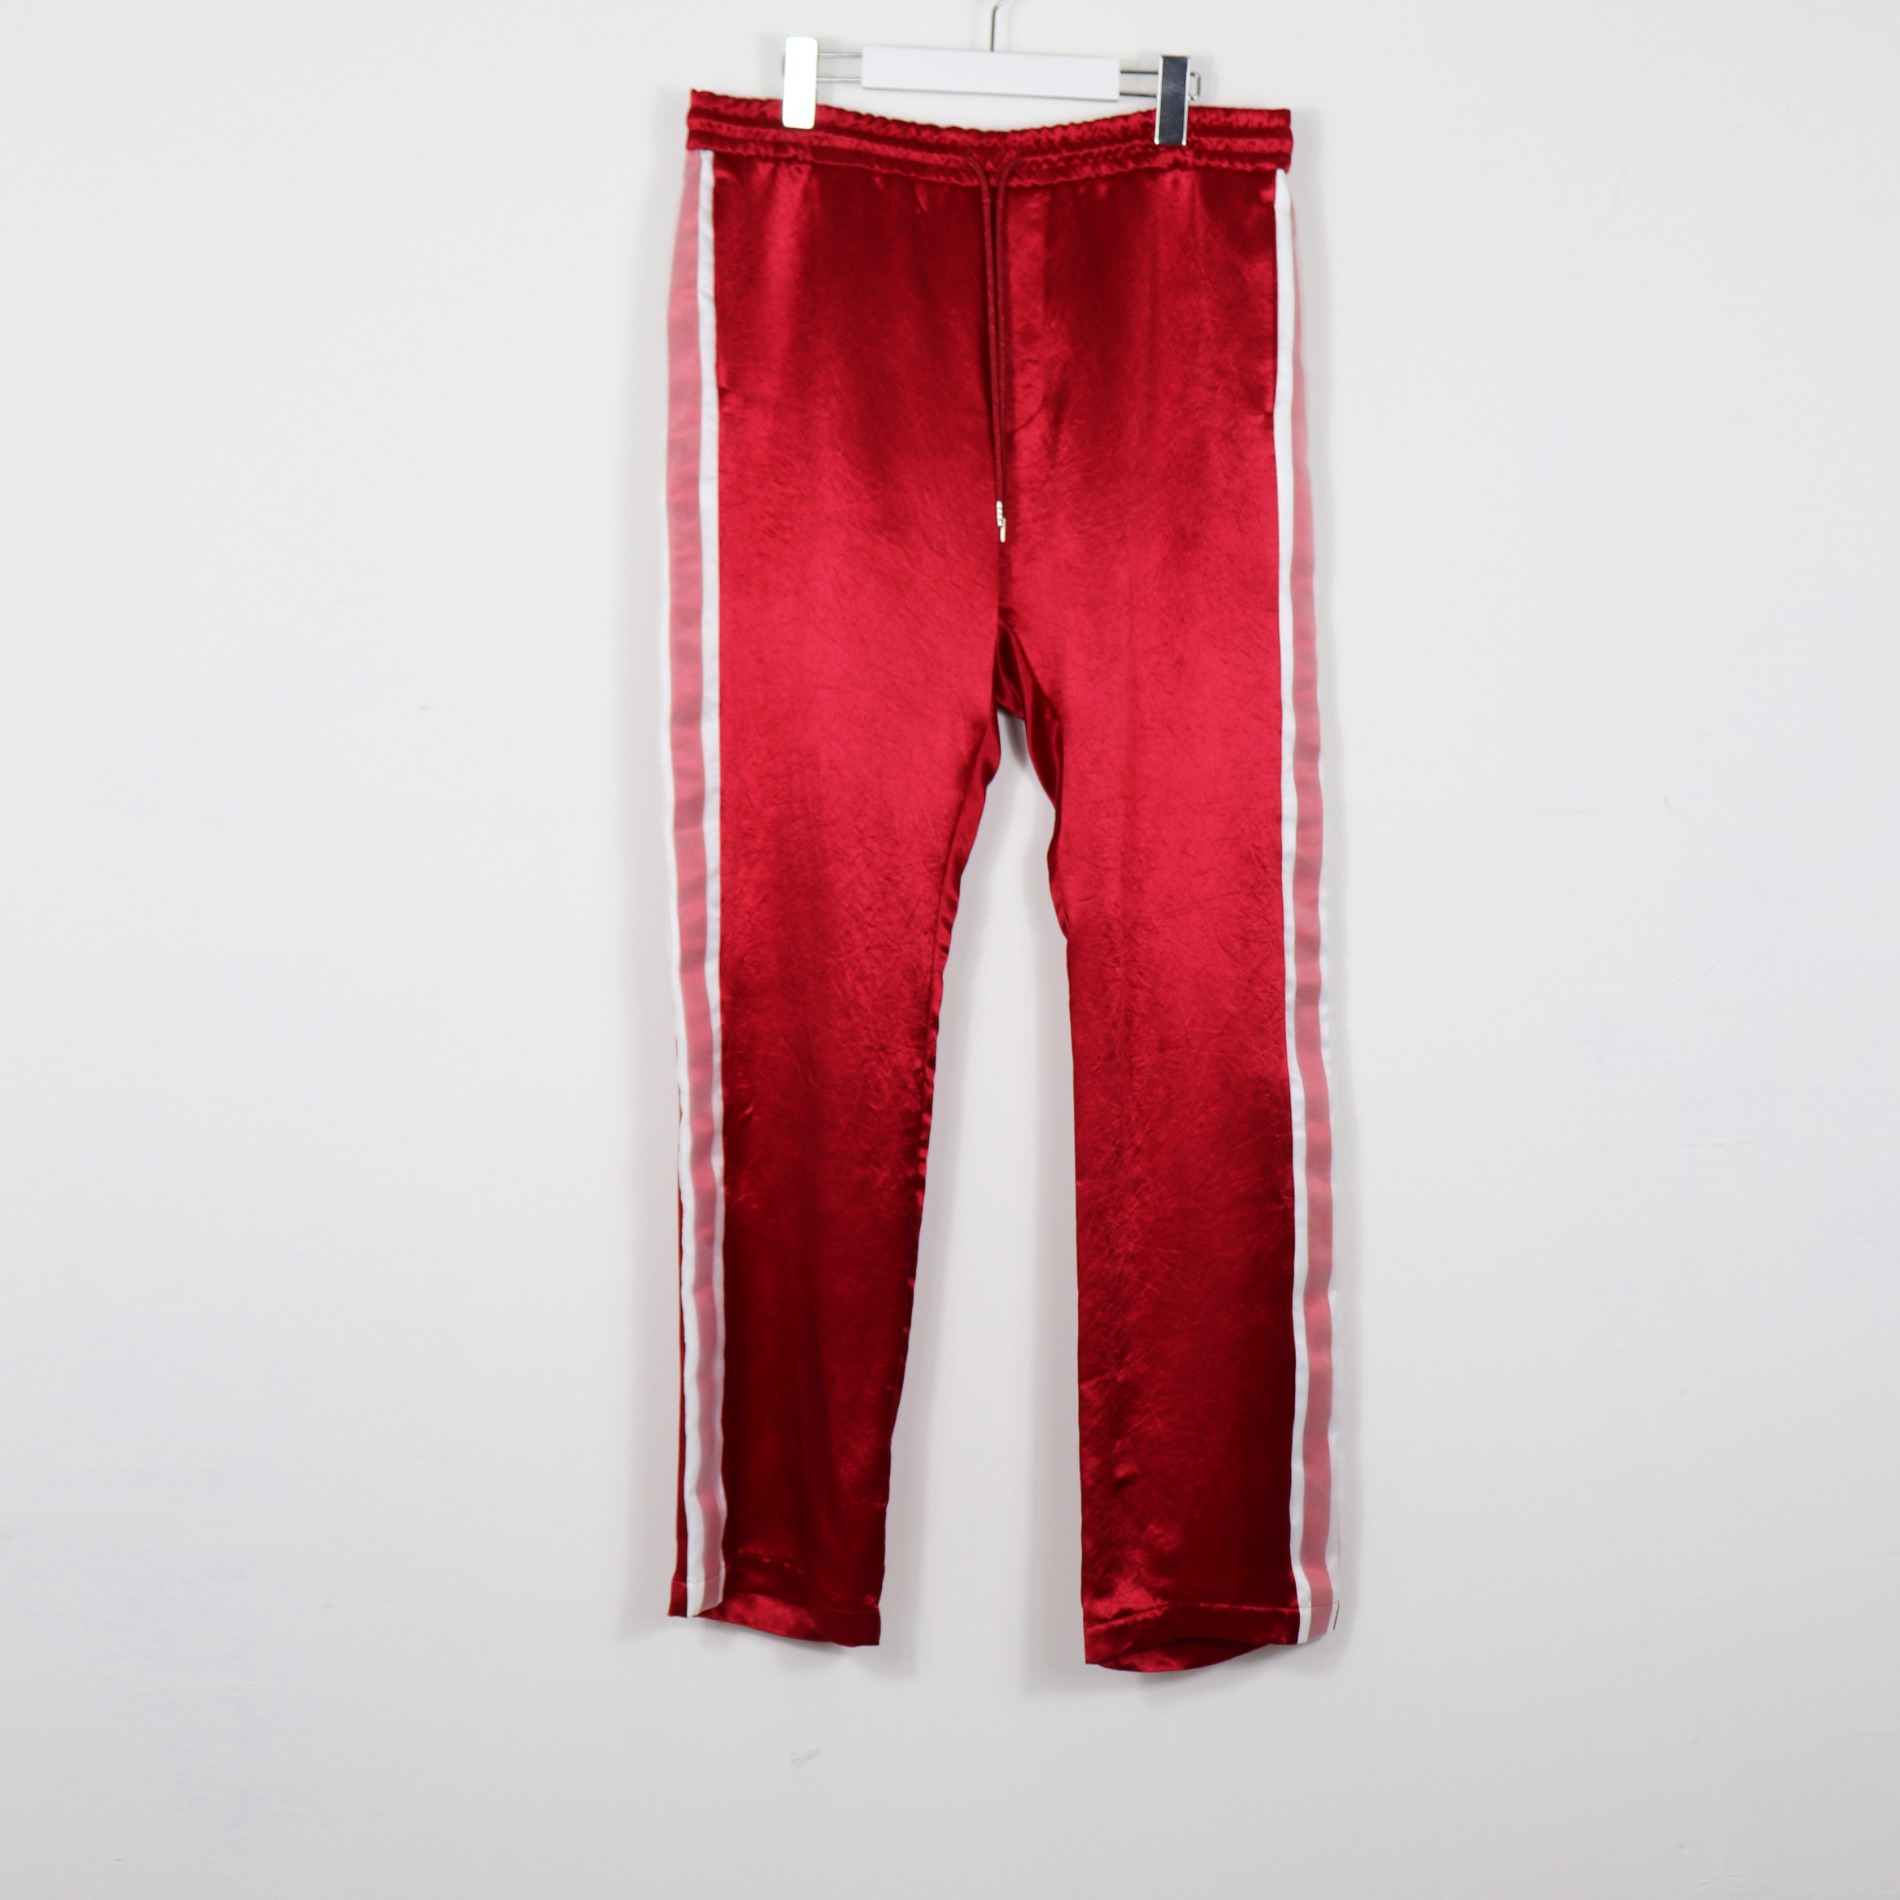 NEONSIGN ACETATE SATIN TRACK PANTS RUBY